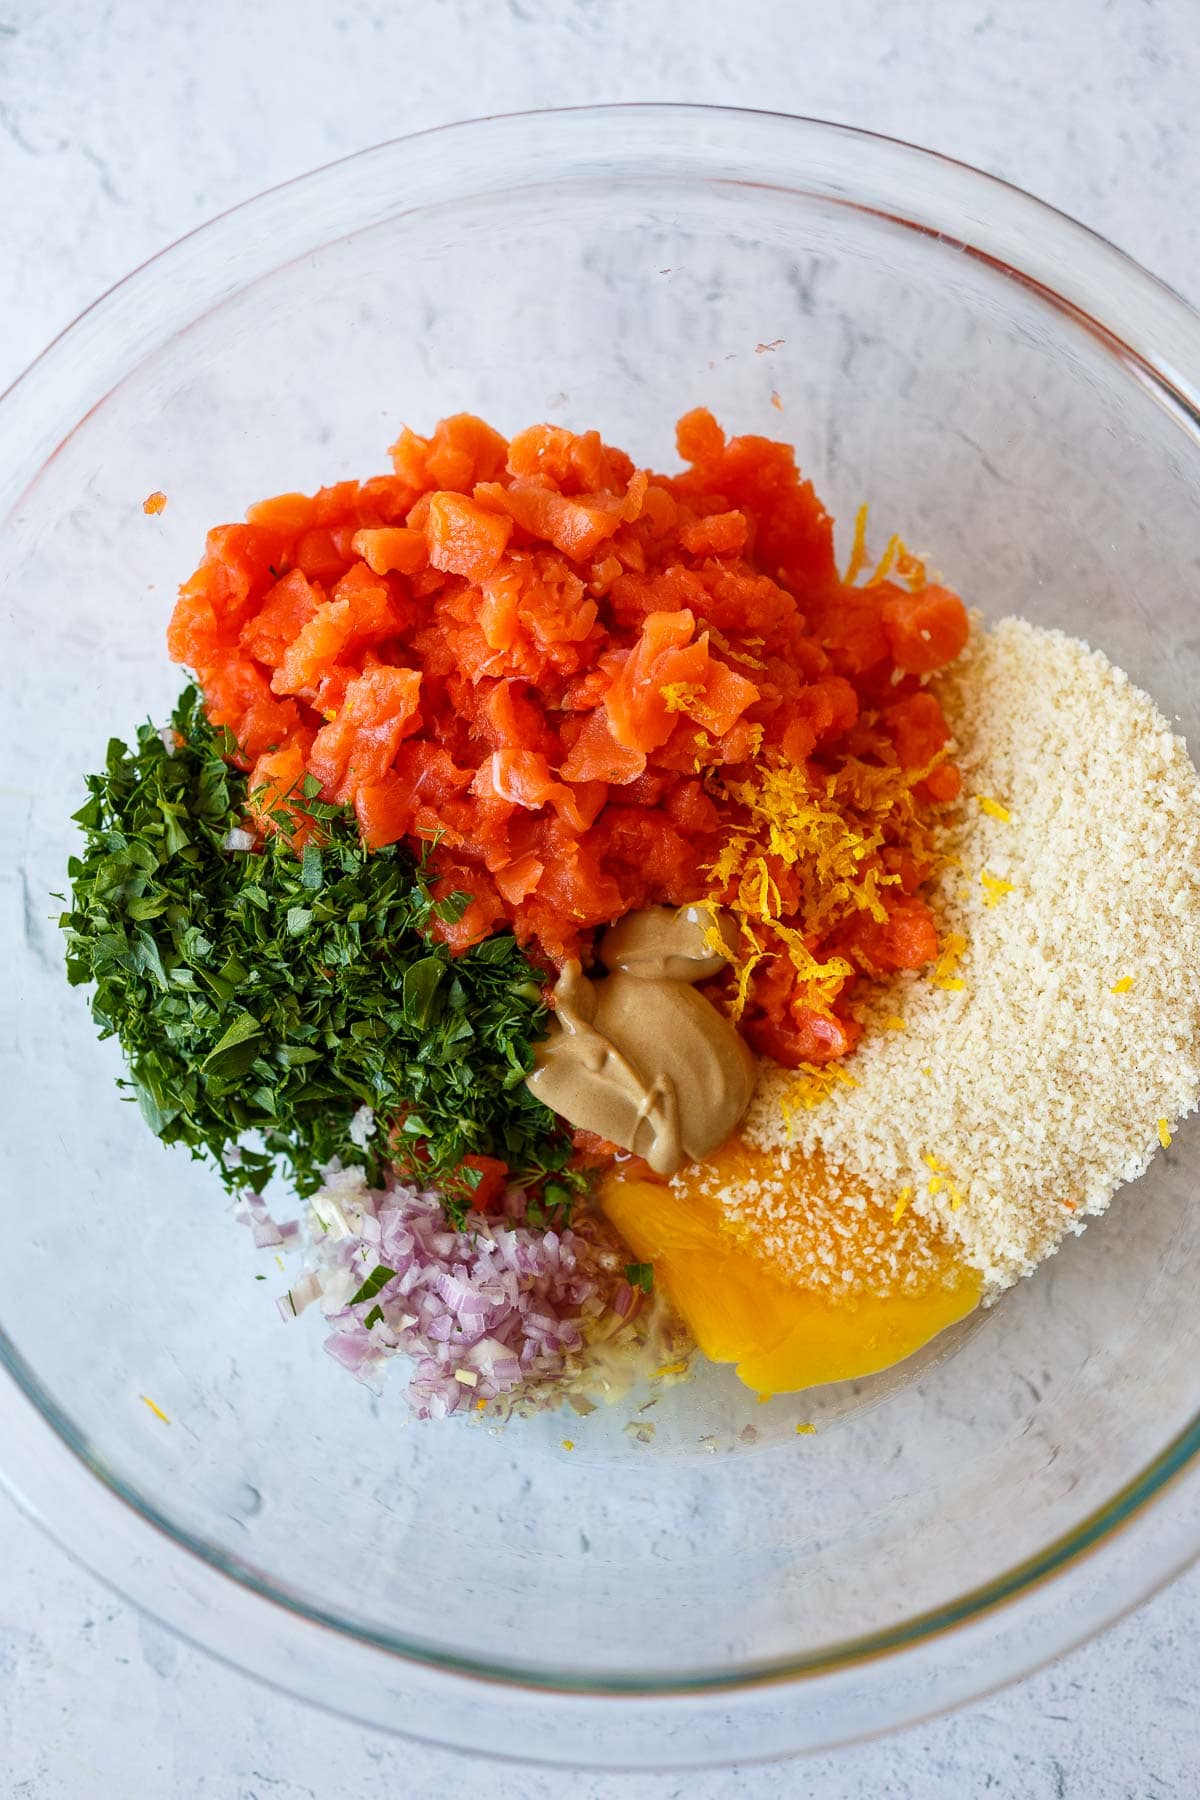 Salmon ingredients: chopped salmon, bread crumbs, parsley, dill, shallots, dijon and egg in a bowl.